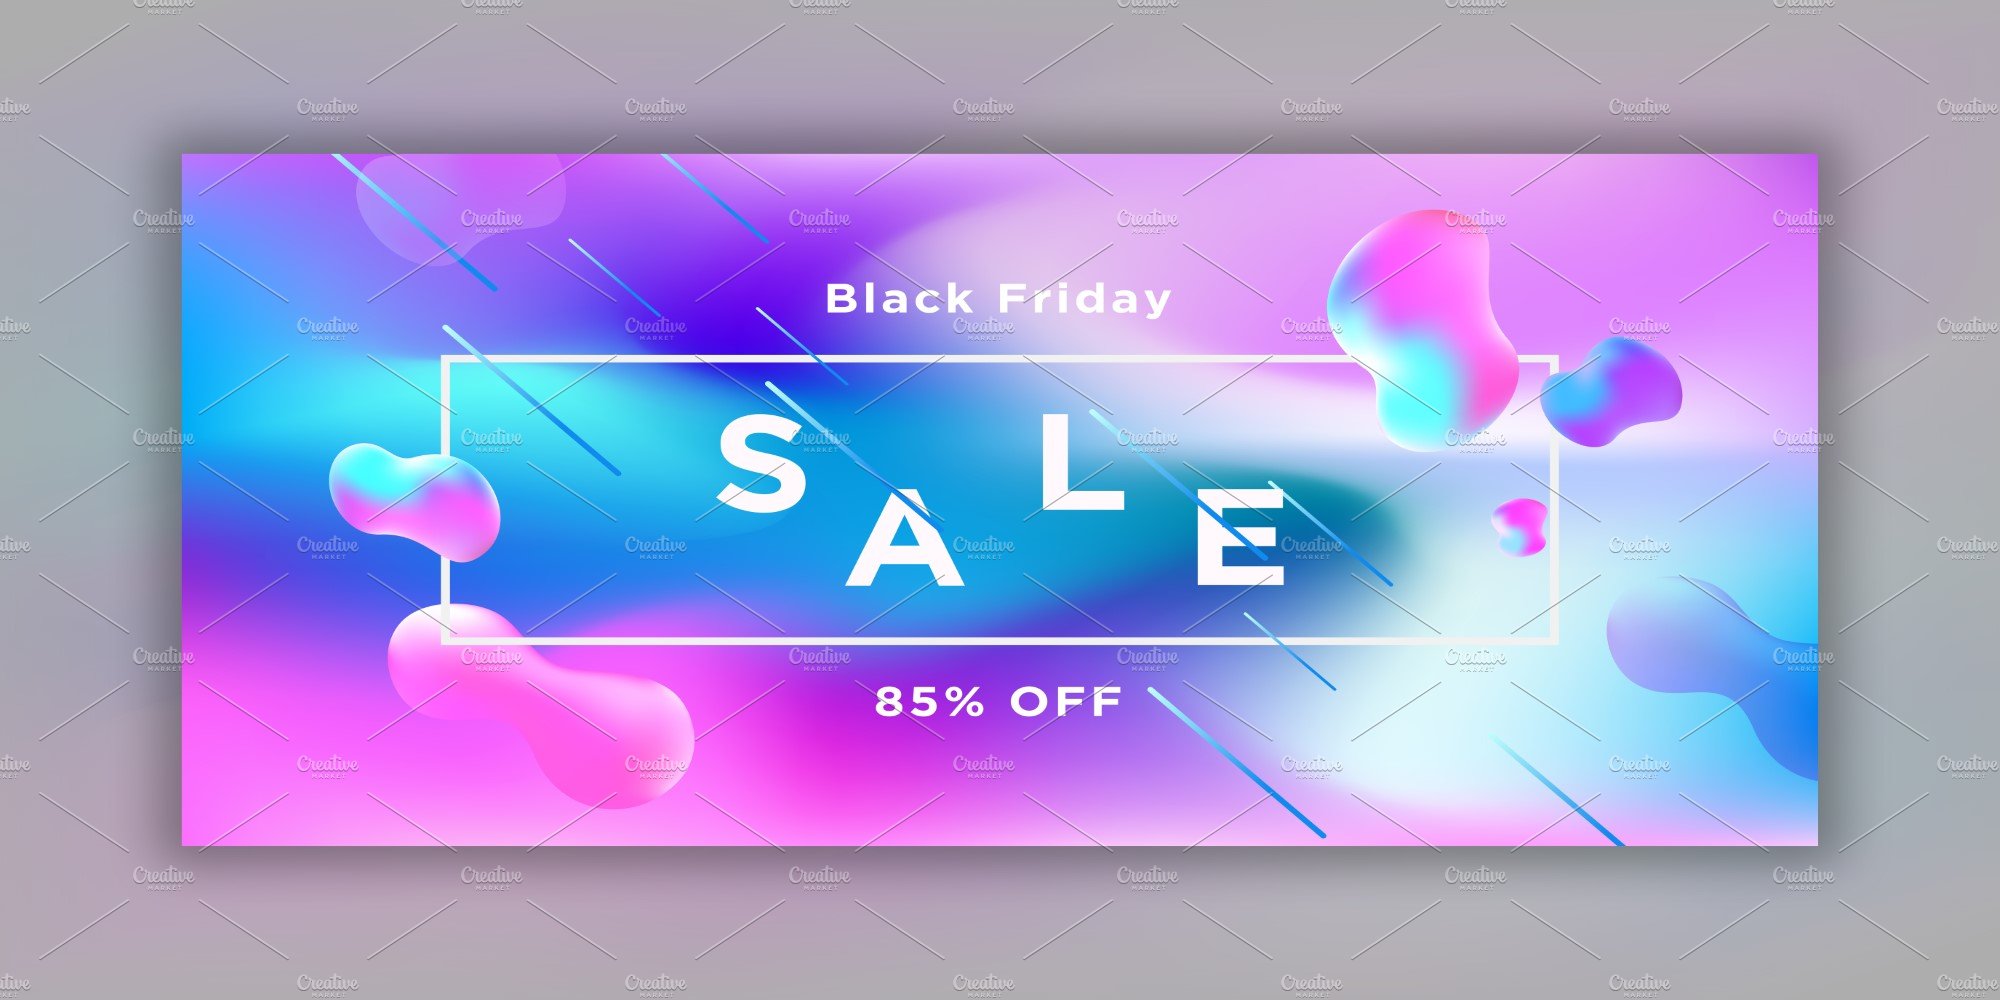 Lilac and blue in a gradient version for your Black Friday banner.